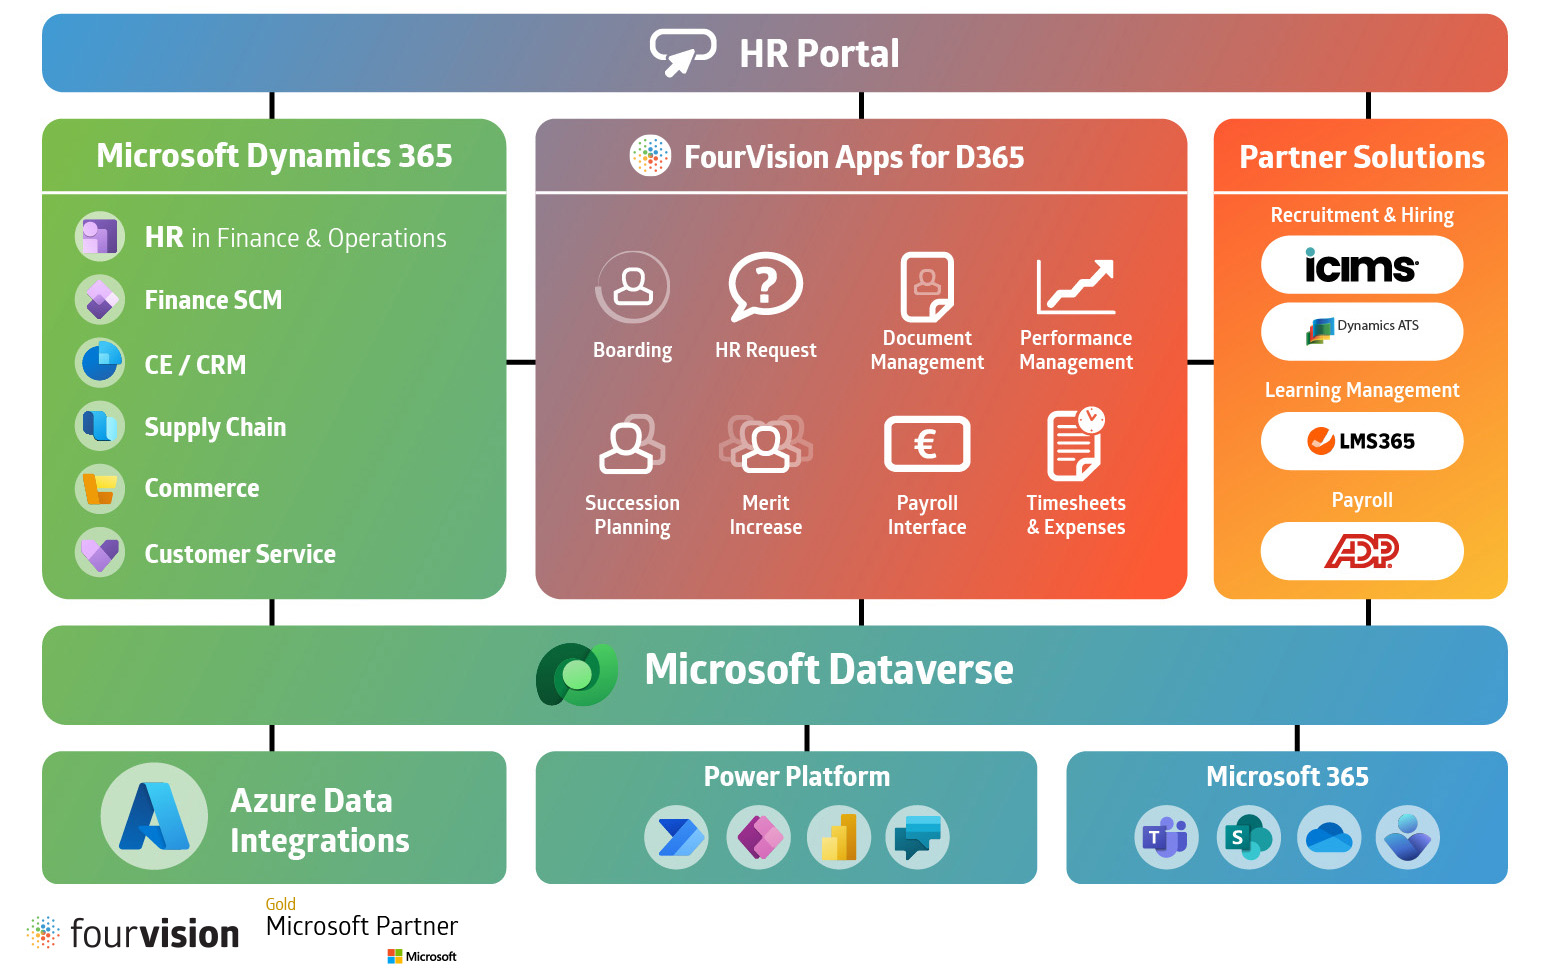 Overview of Microsoft HRIS in 365 ecosystem